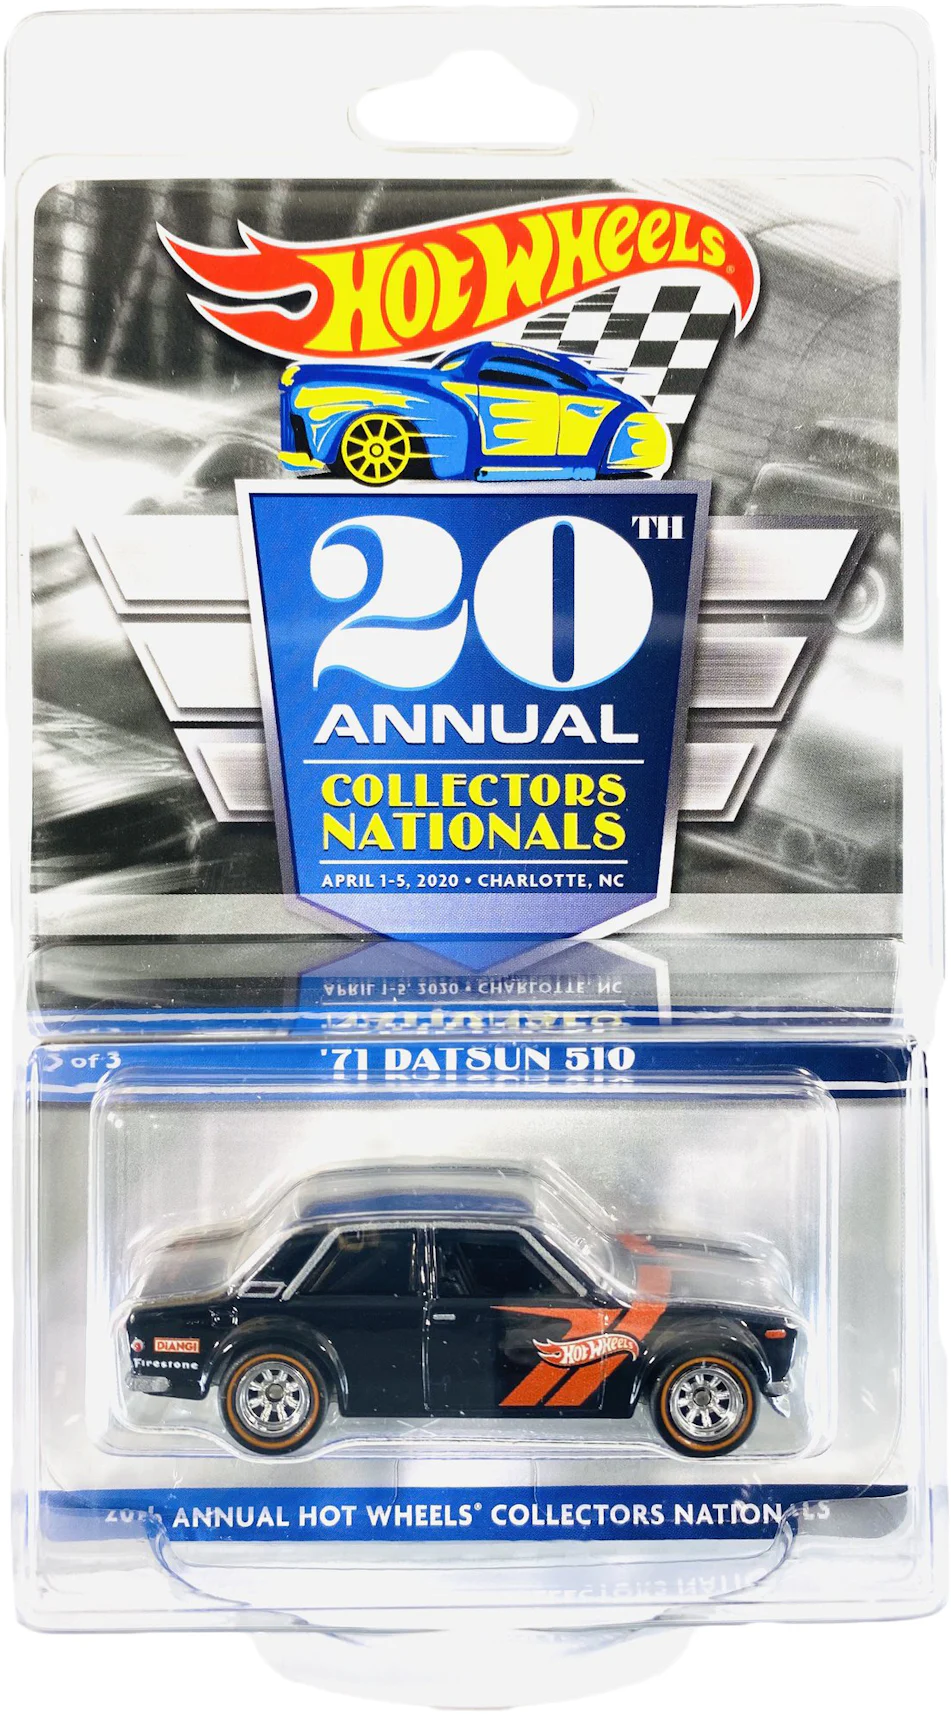 Hot Wheels 20thAnnual Collectors Nationals Convention '71 Datsun 510 - GB